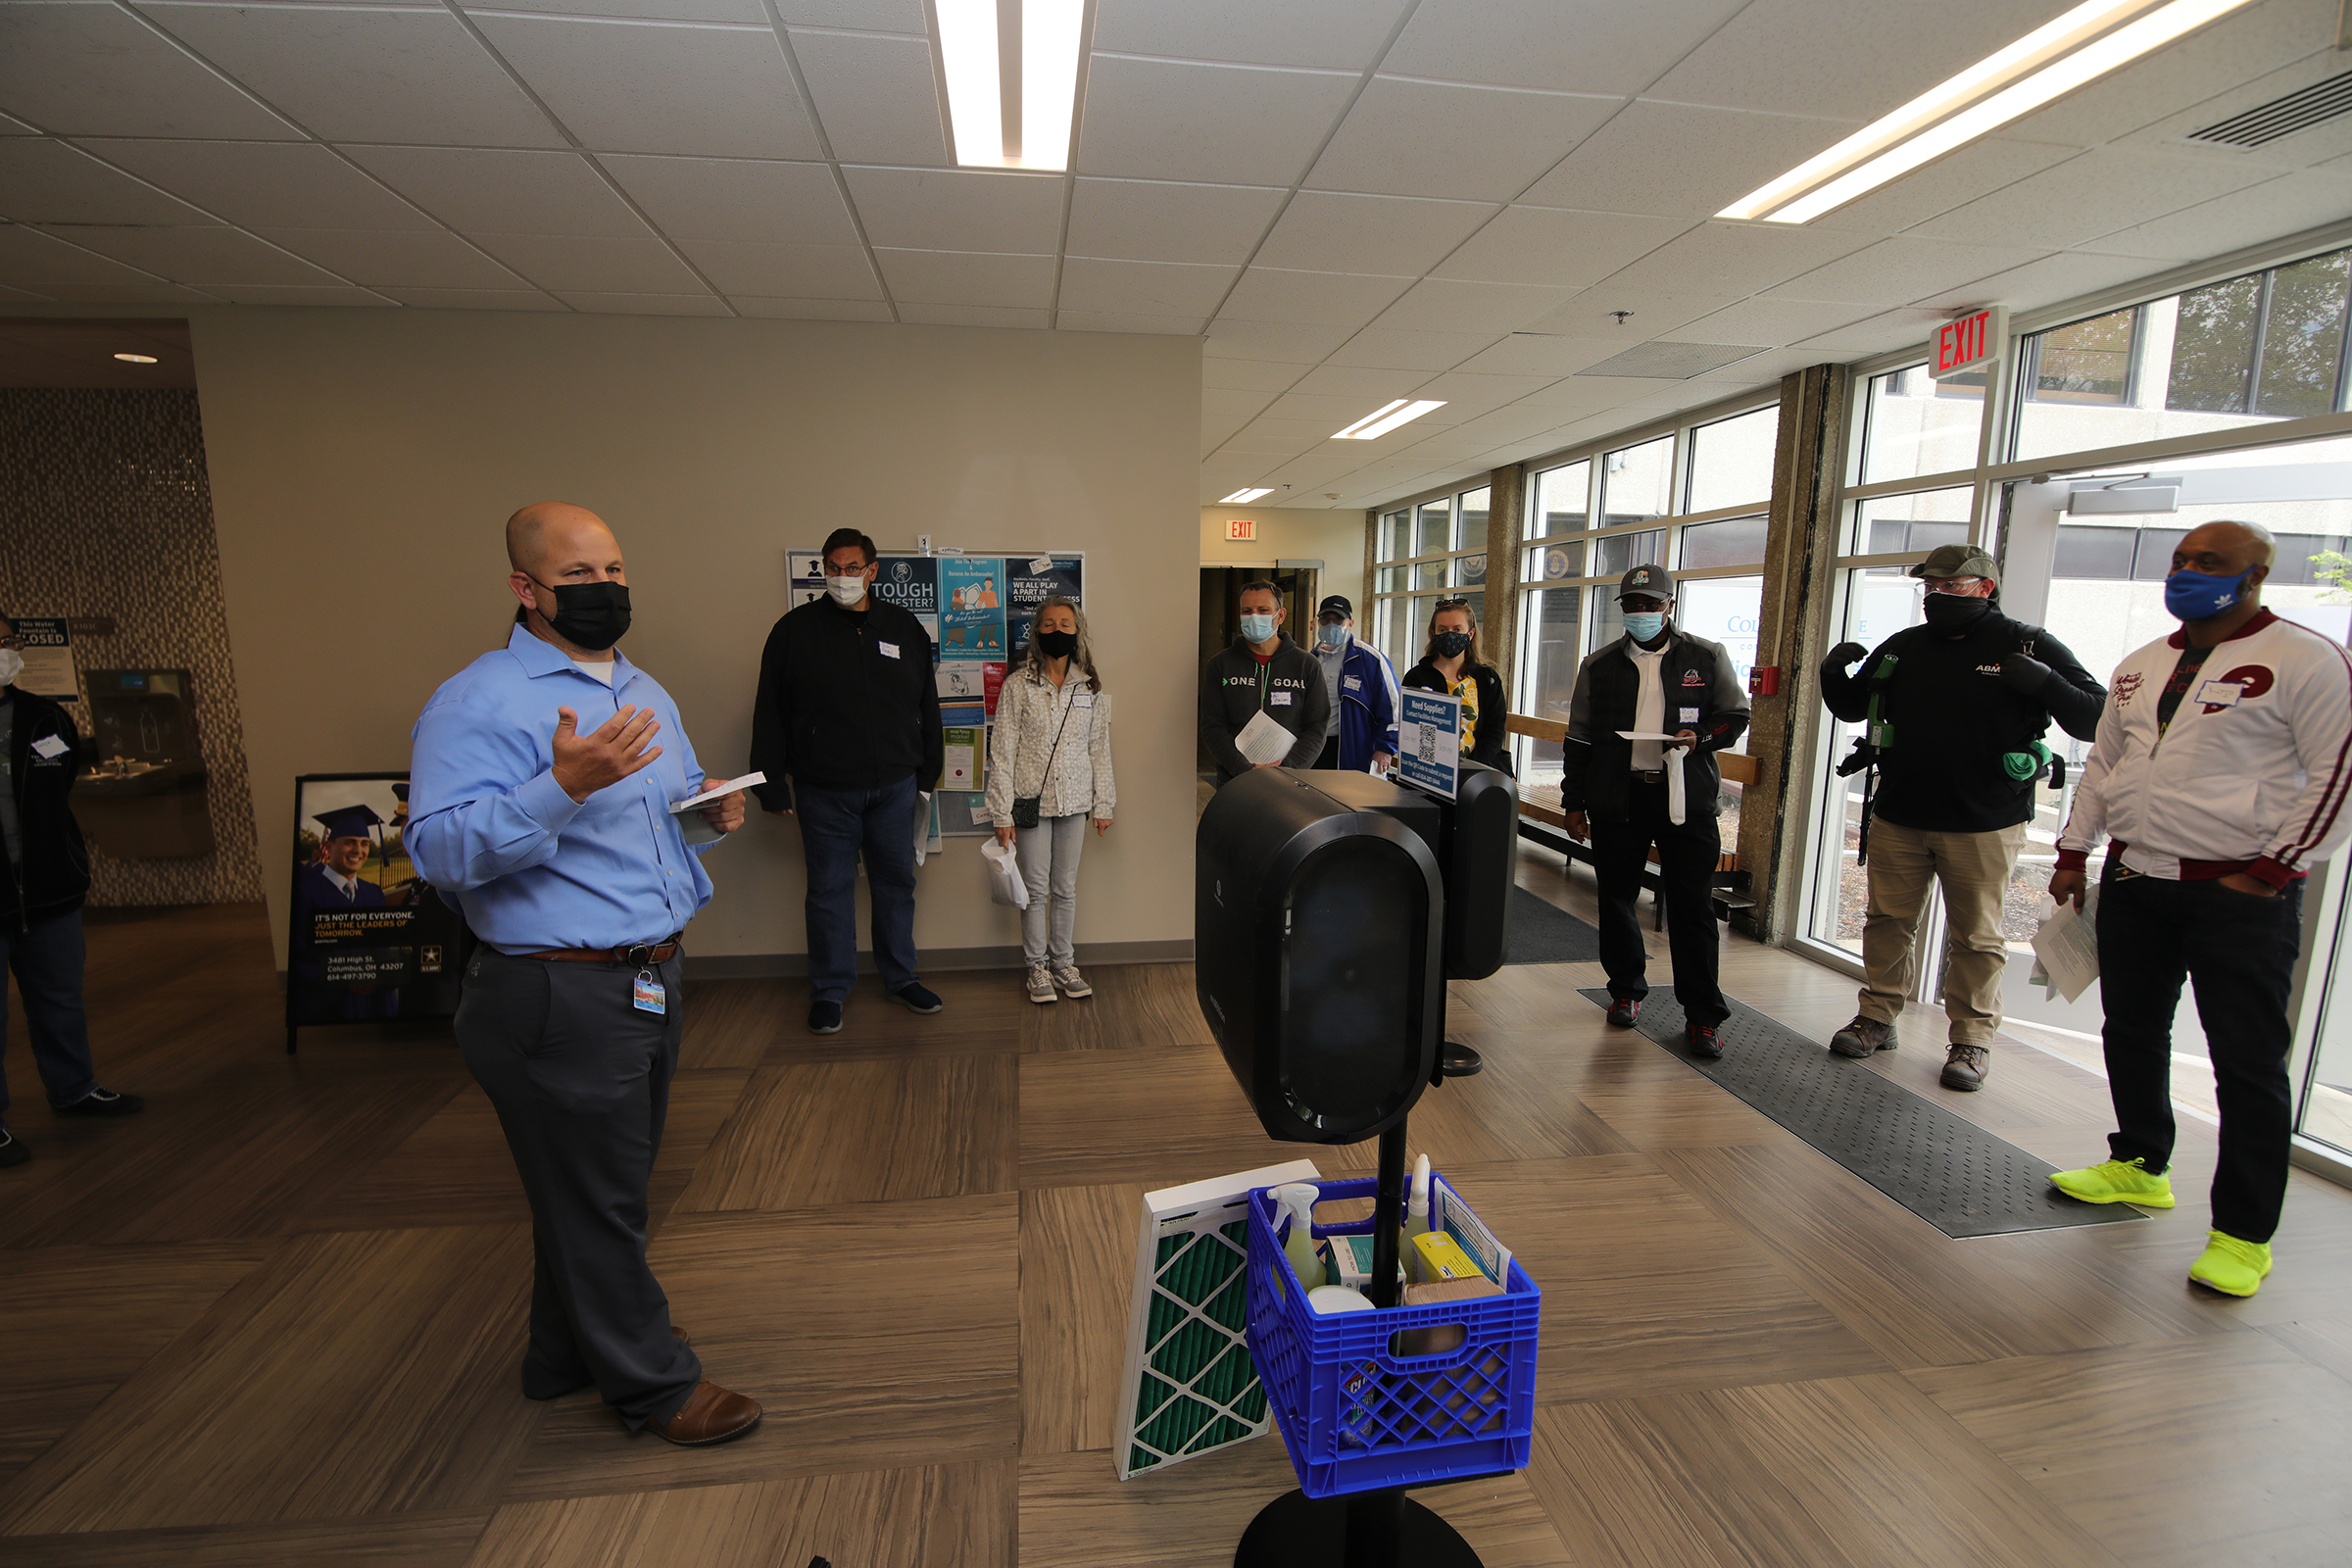 On the left, Mark Dudgeon, Facilities Management senior director, talks to faculty and staff on a tour of the Columbus Campus in the spring of 2021.